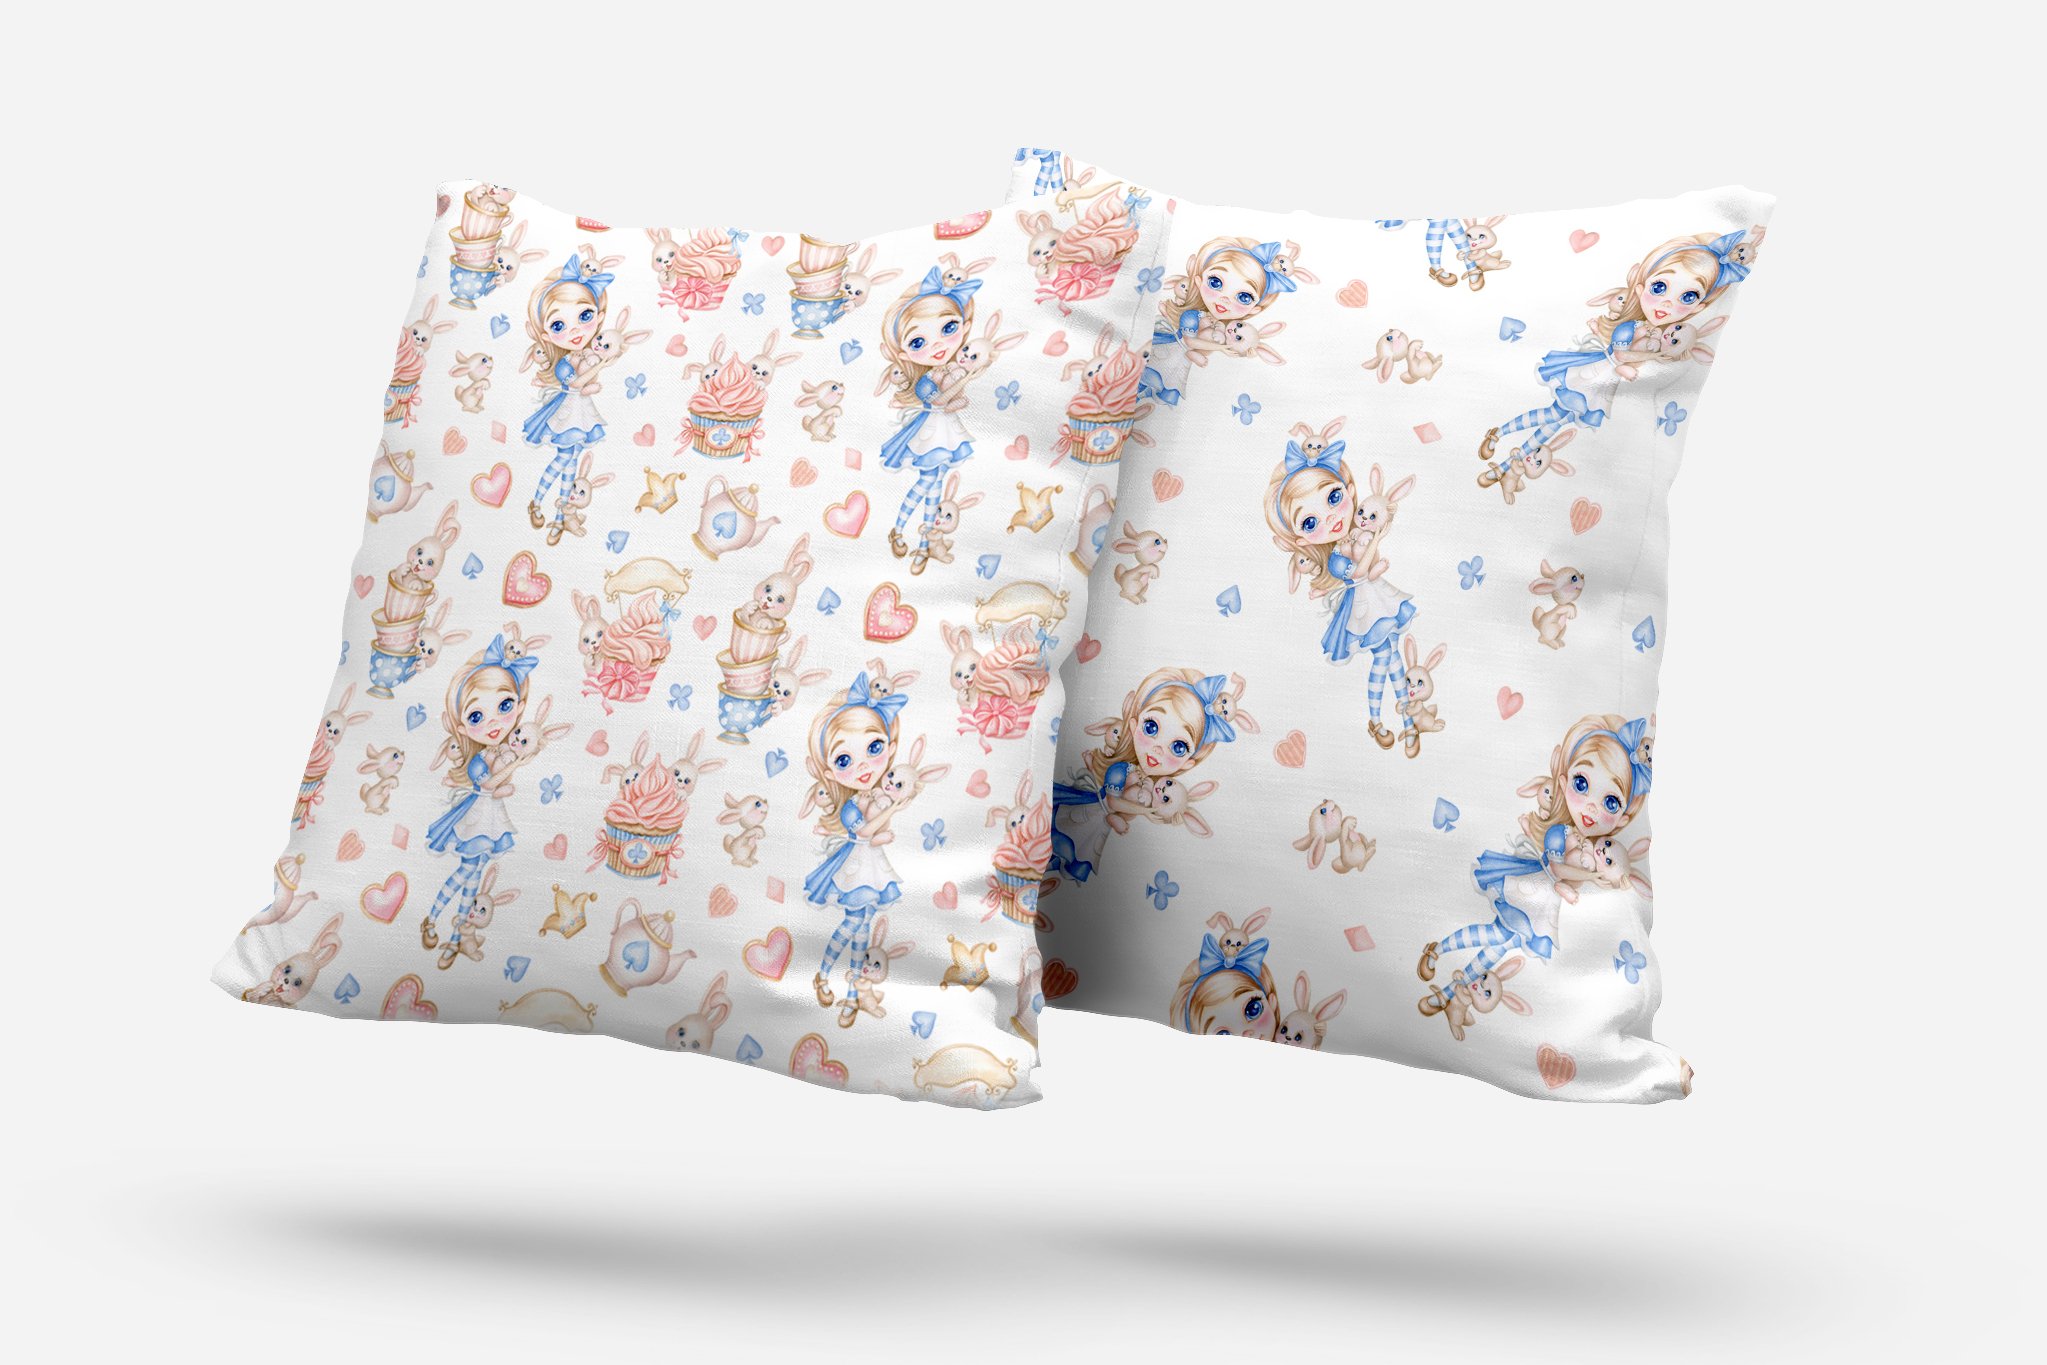 Pictures and images on pillows.